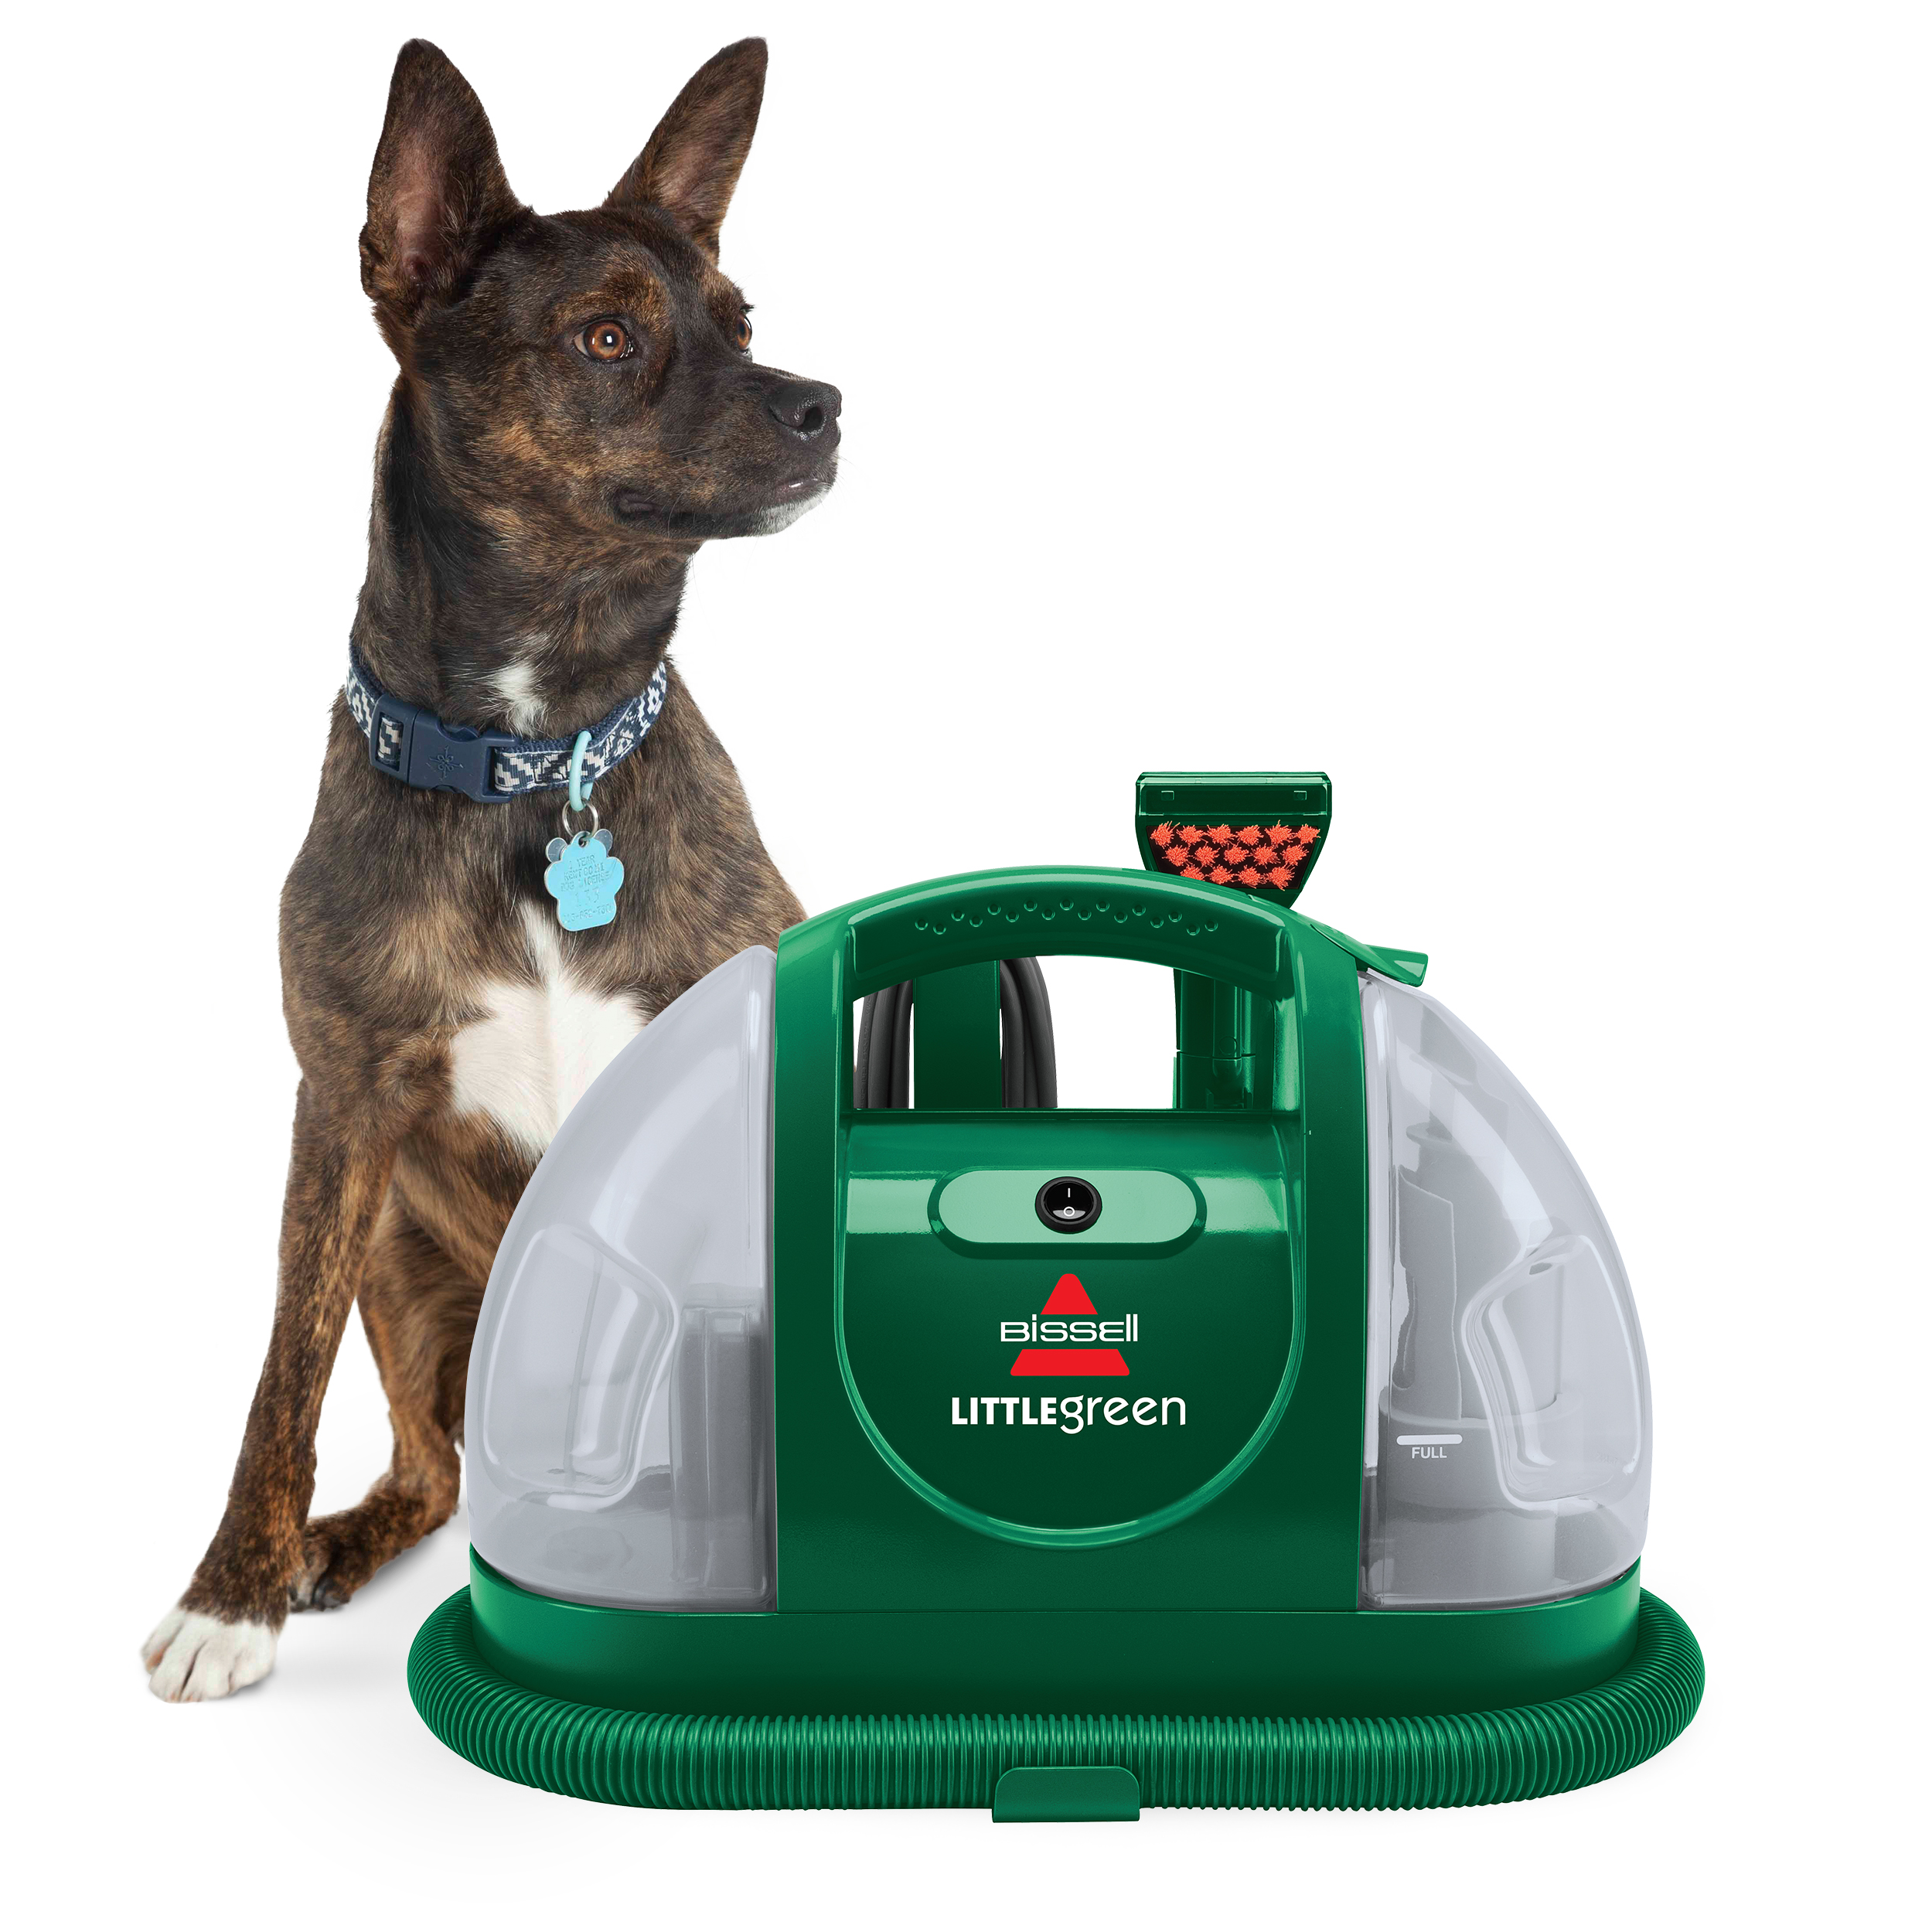 BISSELL Little Green Portable Spot and Stain Cleaner, 1400M - image 1 of 11